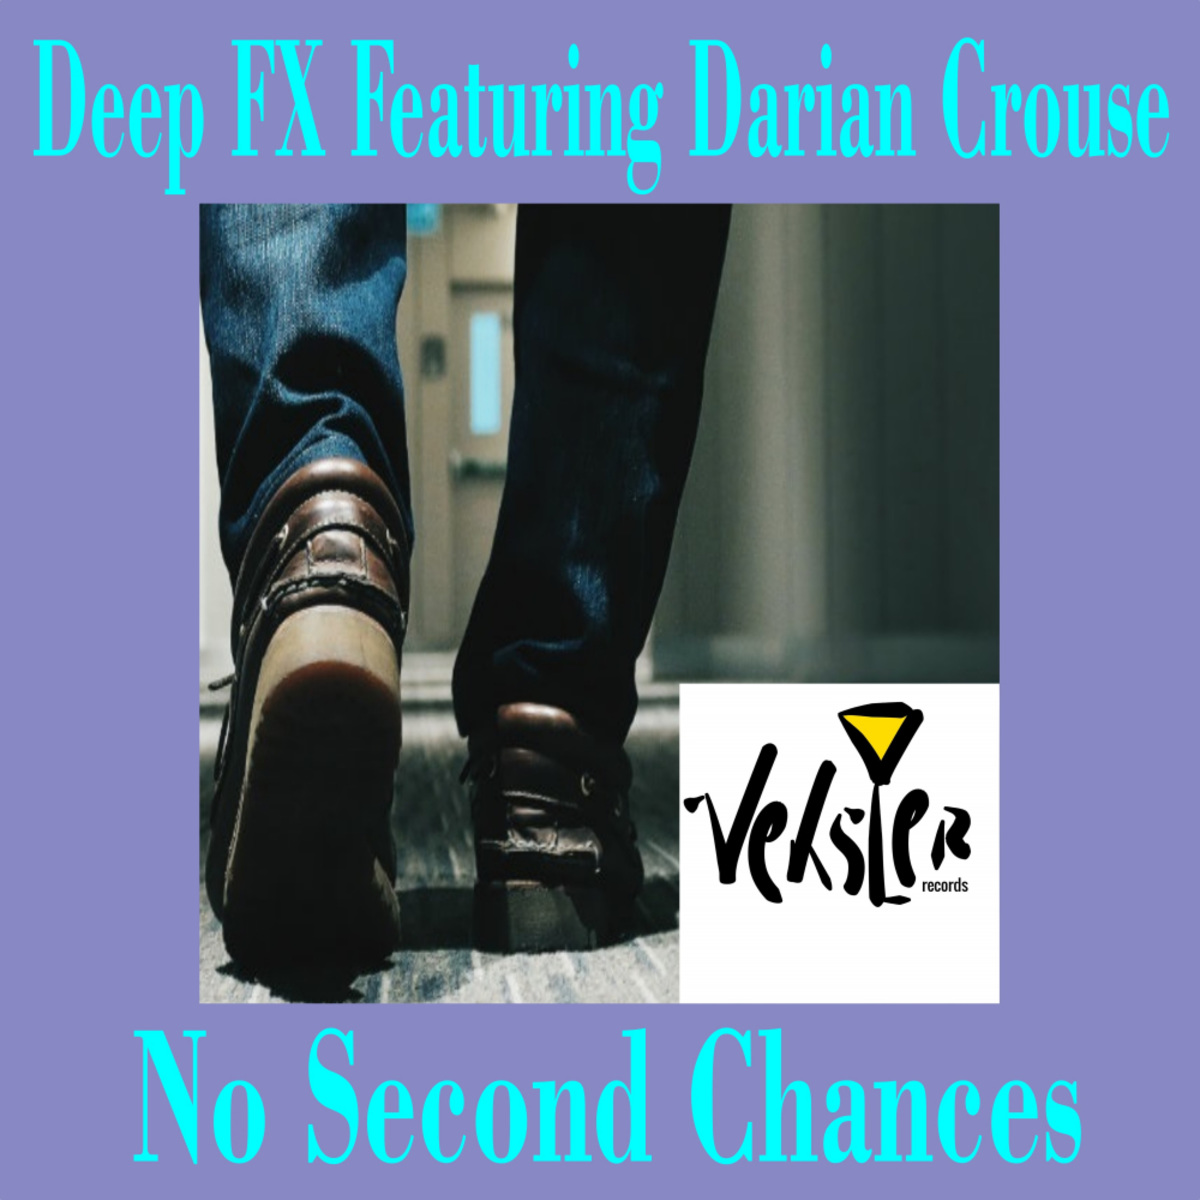 Deep FX ft Darian Crouse - No Second Chances / Veksler Records